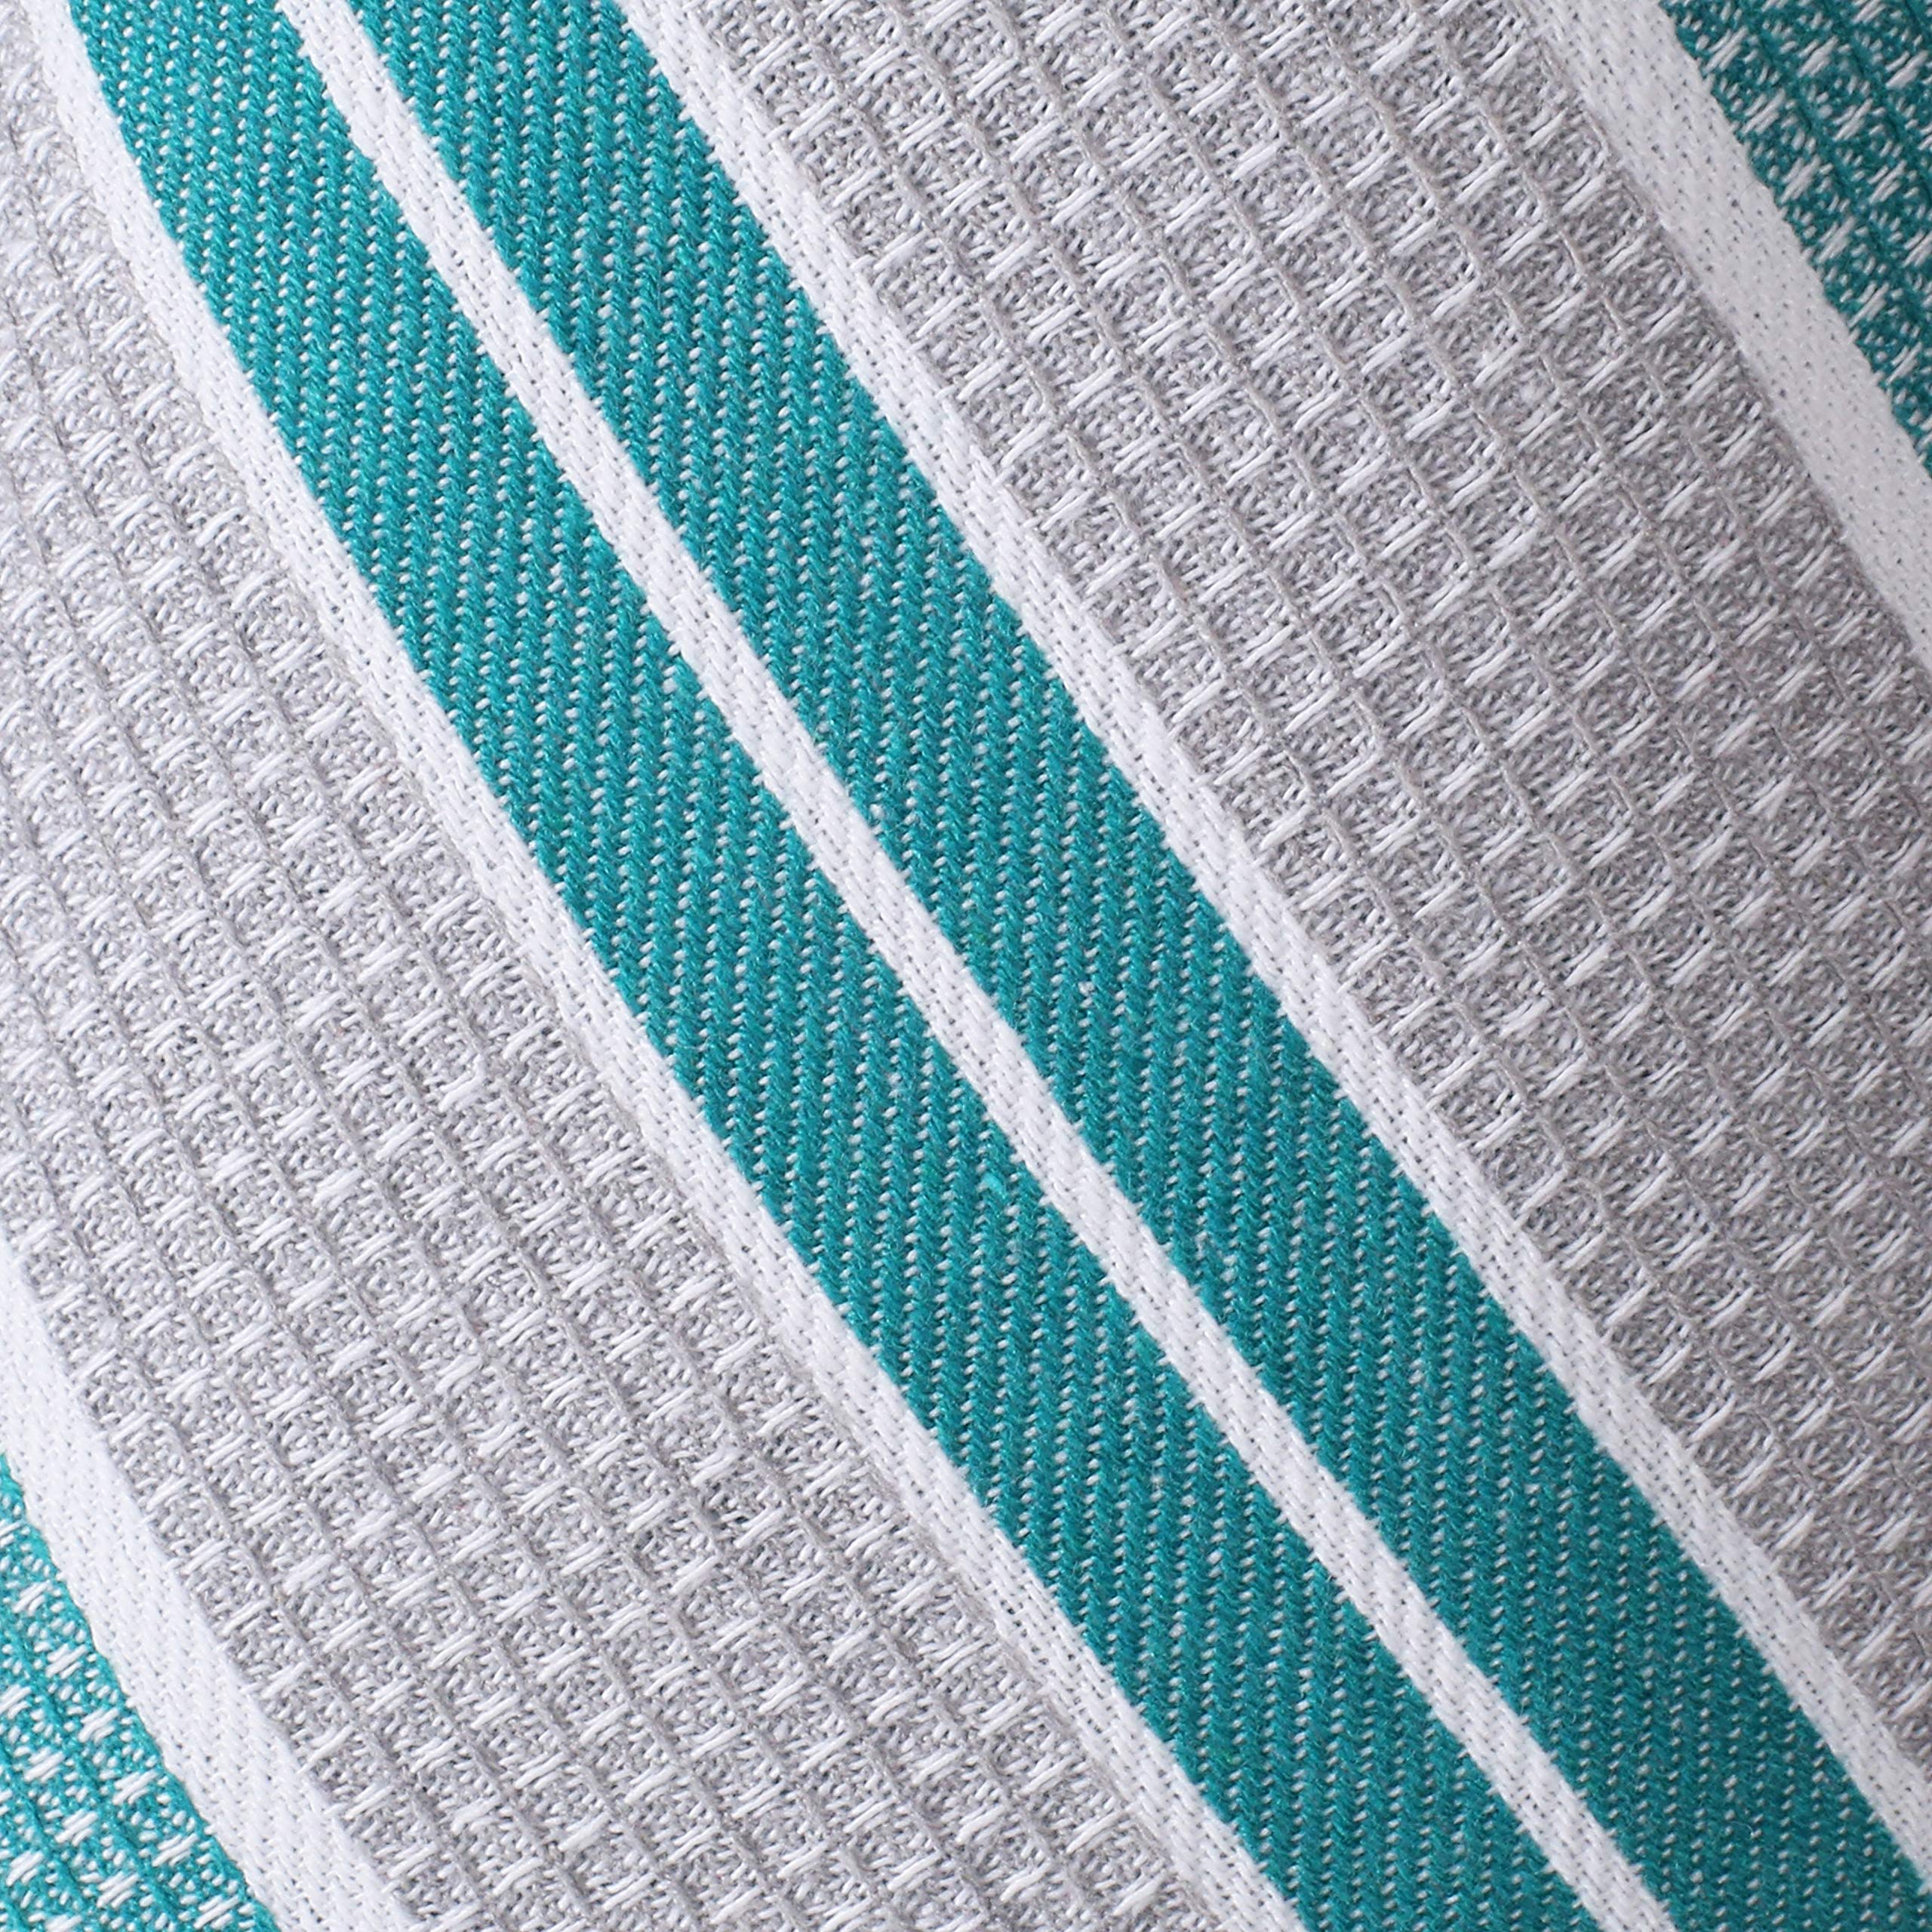 100% Cotton Dish Towels, Honeycomb Pattern, Absorbent, Quick Dry, Professional Grade, Tea Towels Set of 6, Teal Grey, 18x28 Inches